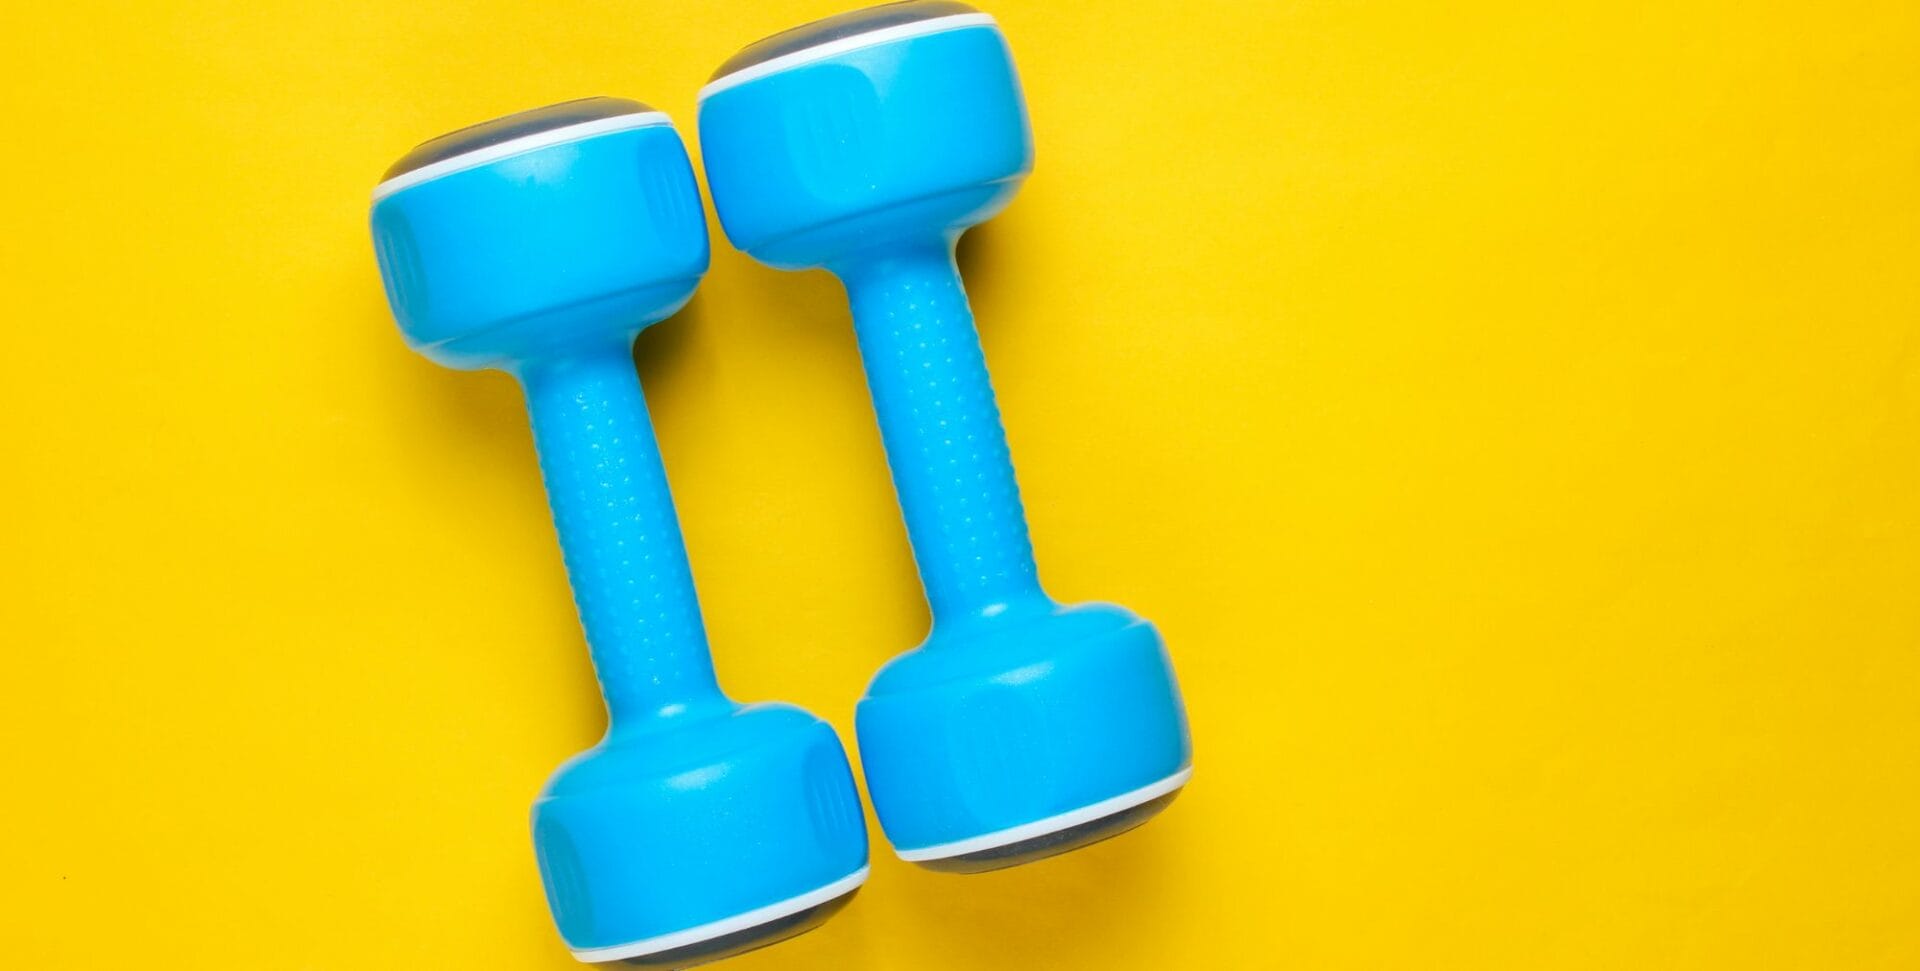 image of two blue dumbells on a yellow background - a metaphor for crisis management